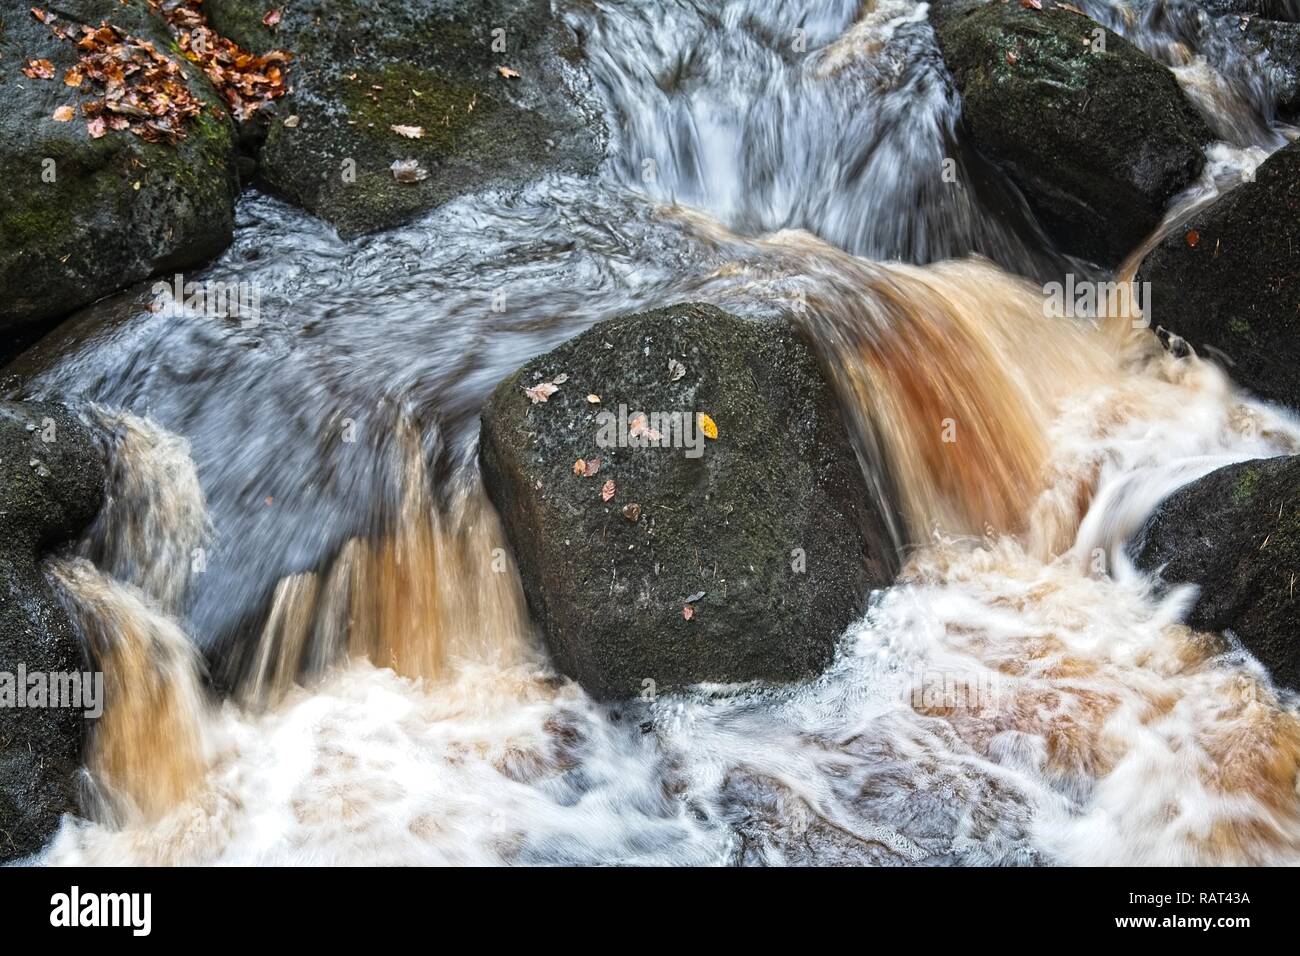 A fast flowing river in the Peak District National Park, UK. The erosive force of Burbage Brook through Padley Gorge is seen in its turbulant flow. Stock Photo